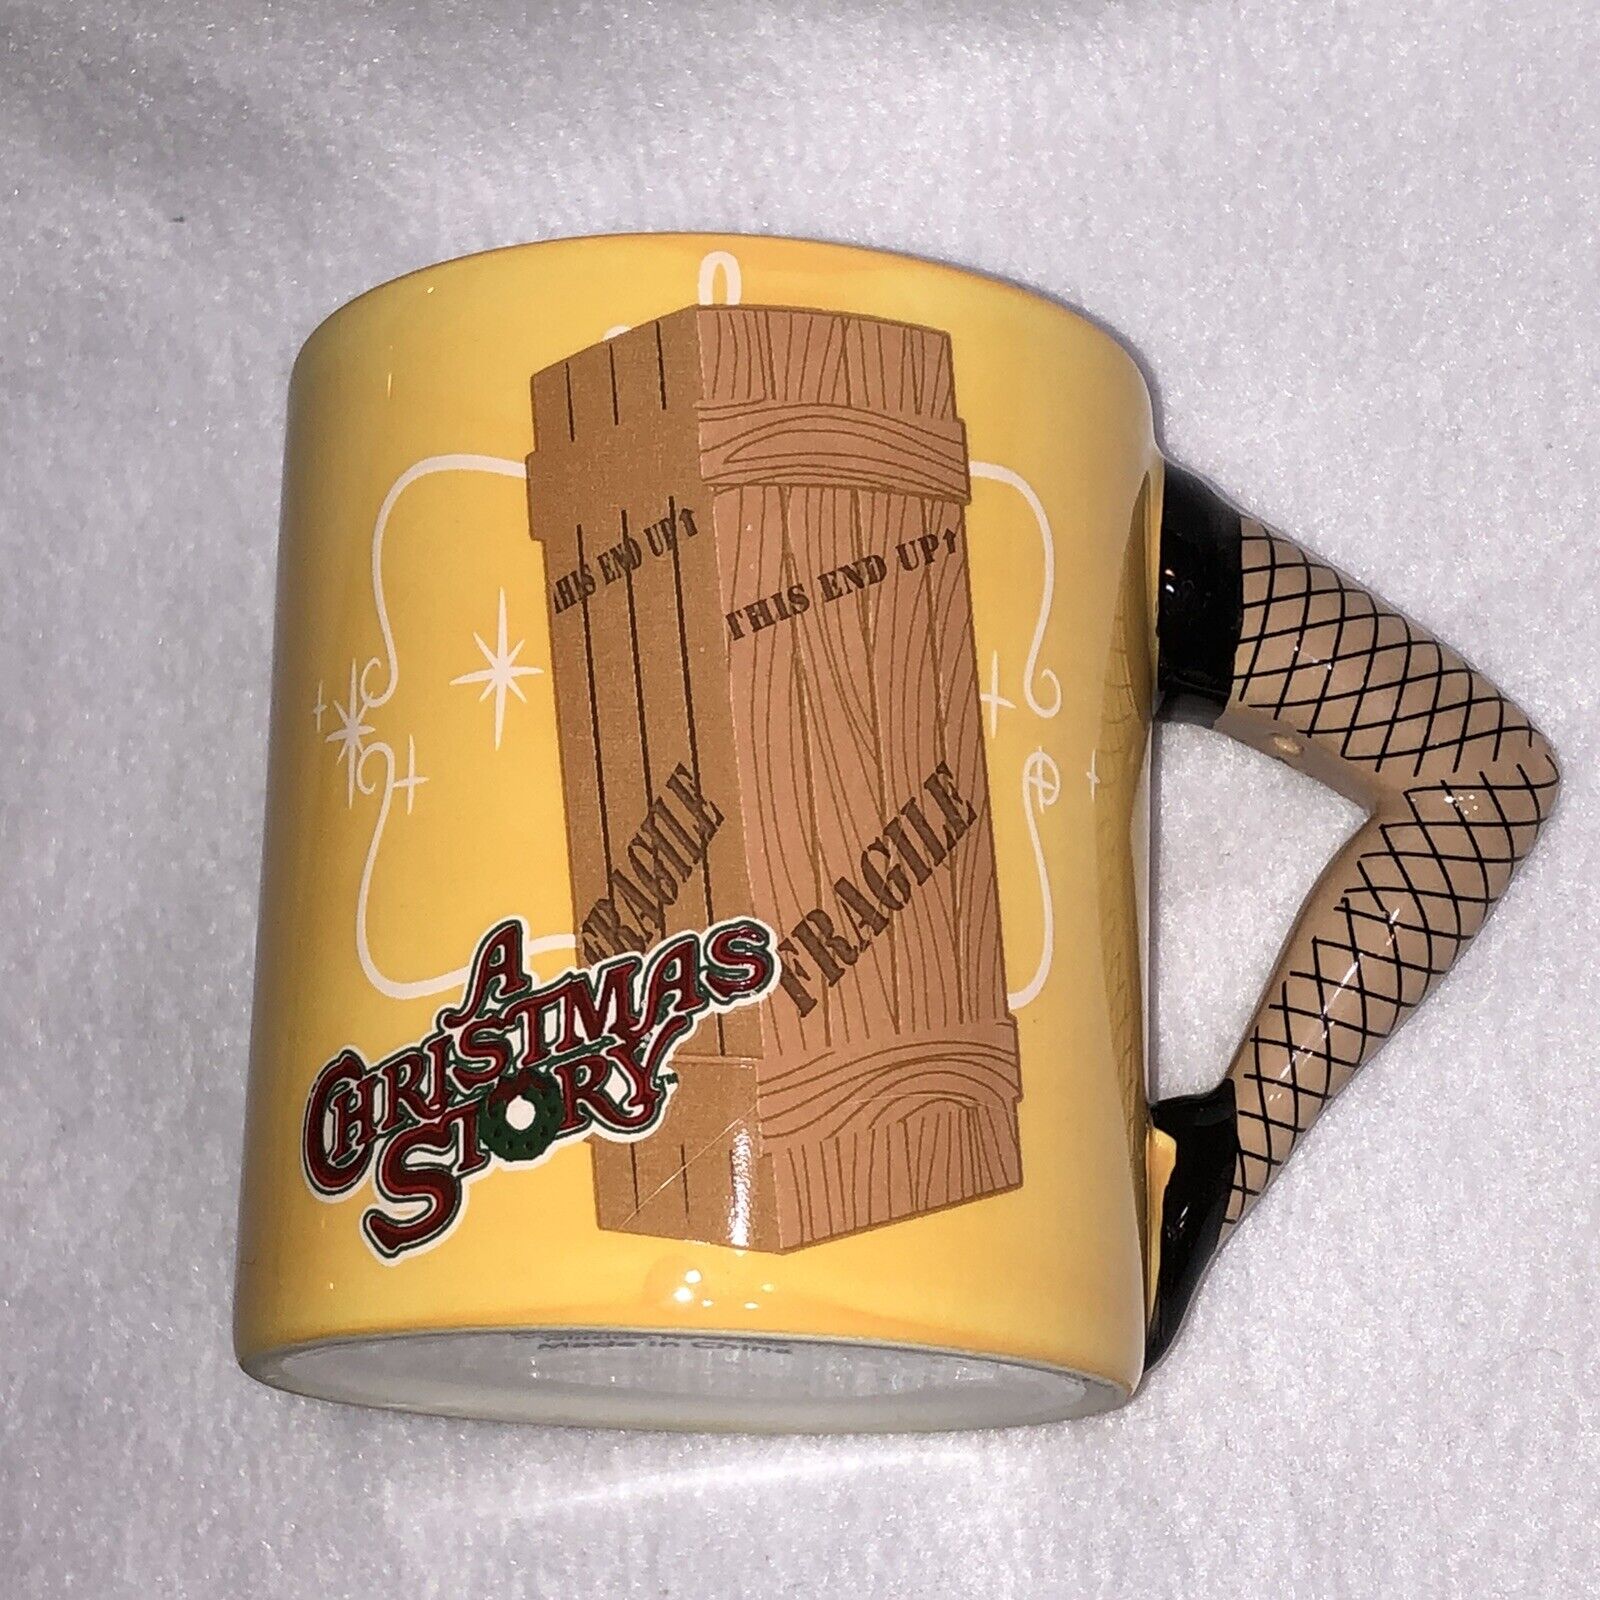 A Christmas Story Leg Lamp Crate Fra-gee-lay Sculpted Coffee Cup Mug NECA